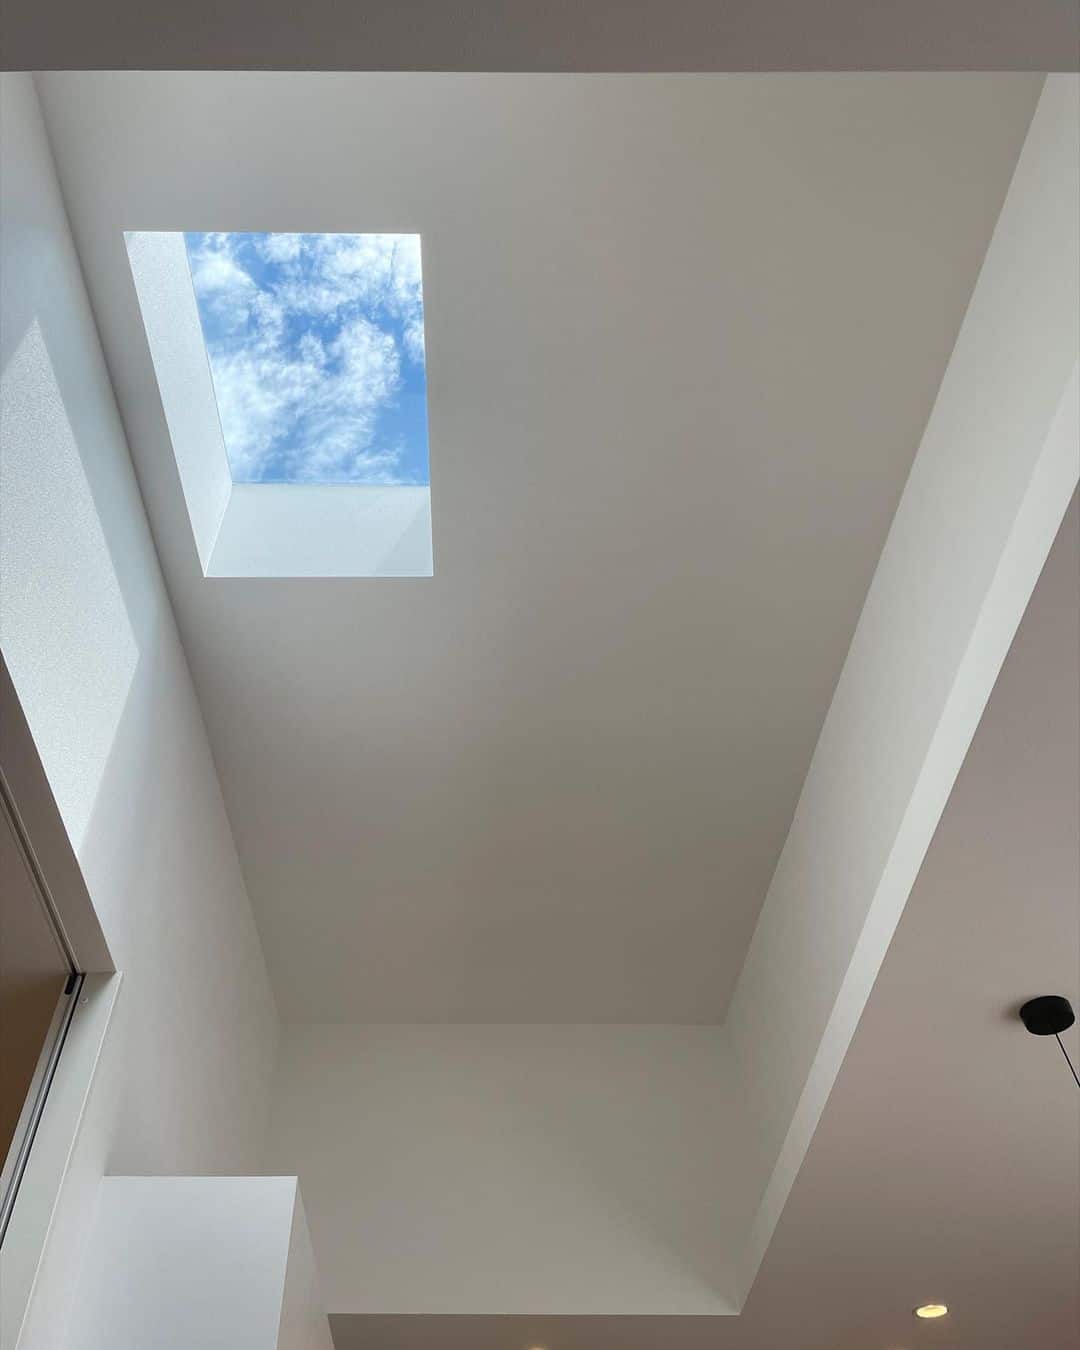 What Should You Consider Before Purchasing a Skylight Window?